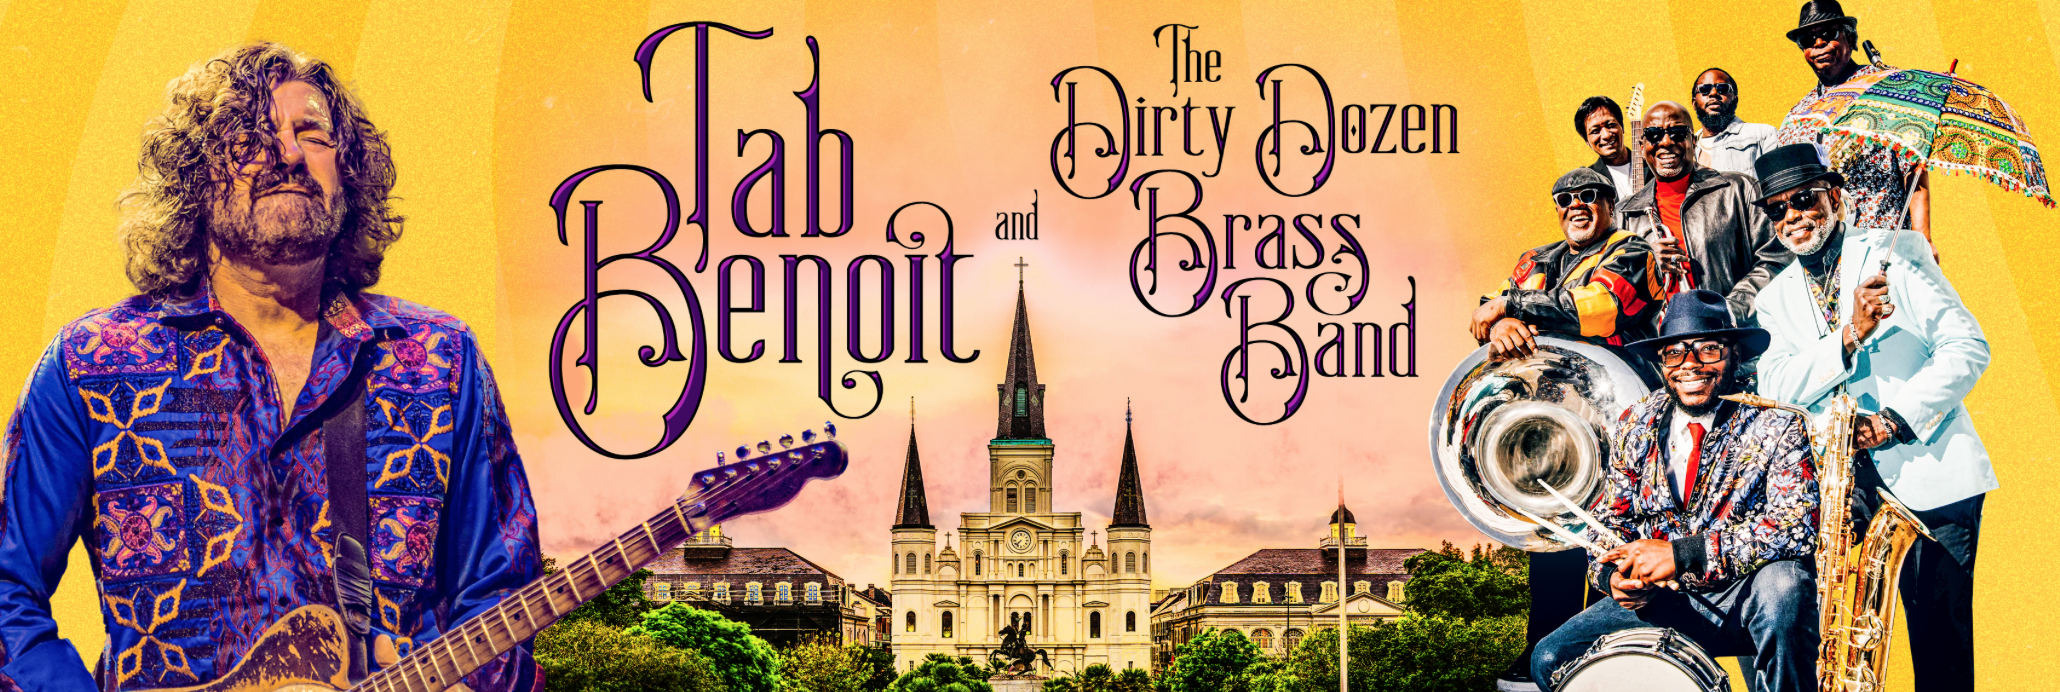 Featured image for “Tab Benoit & The Dirty Dozen Brass Band”